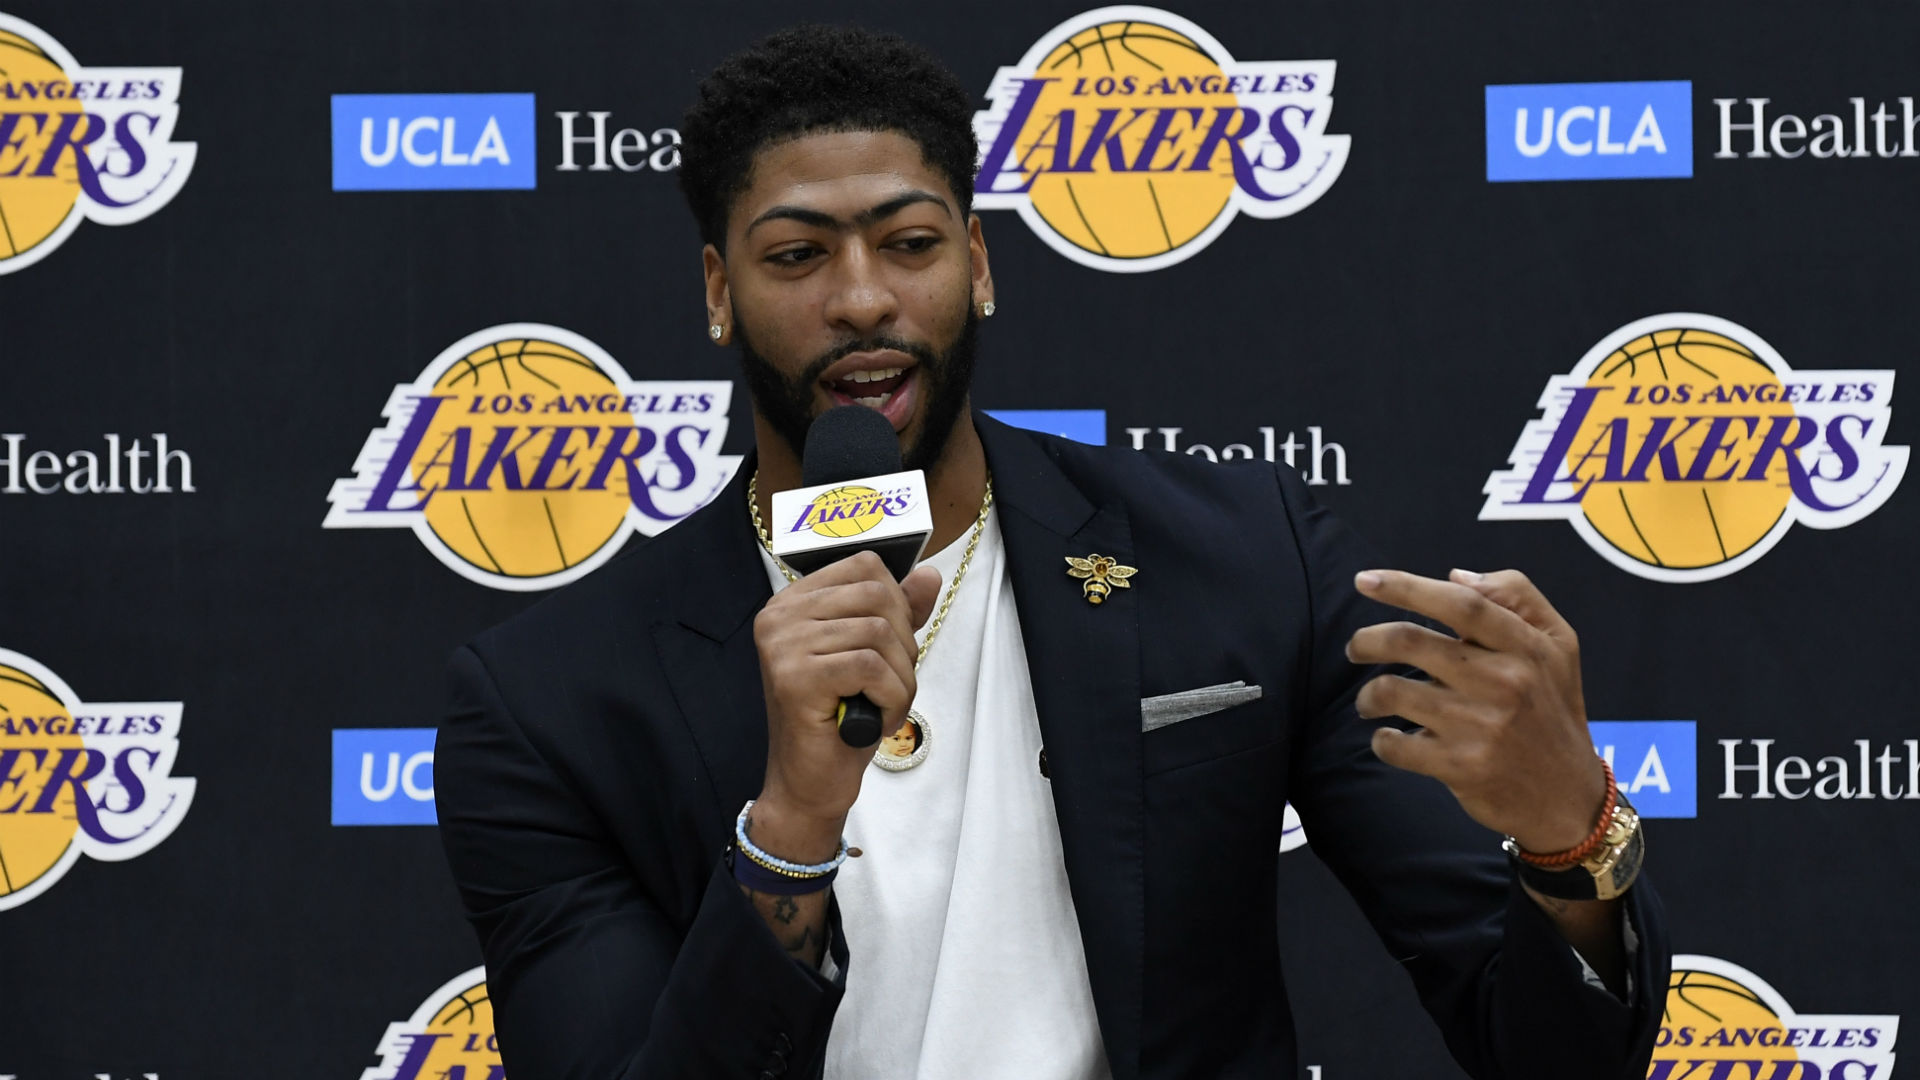 Los Angeles Lakers star Anthony Davis made sure he was on target with his ceremonial first pitch at Dodger Stadium on Tuesday.